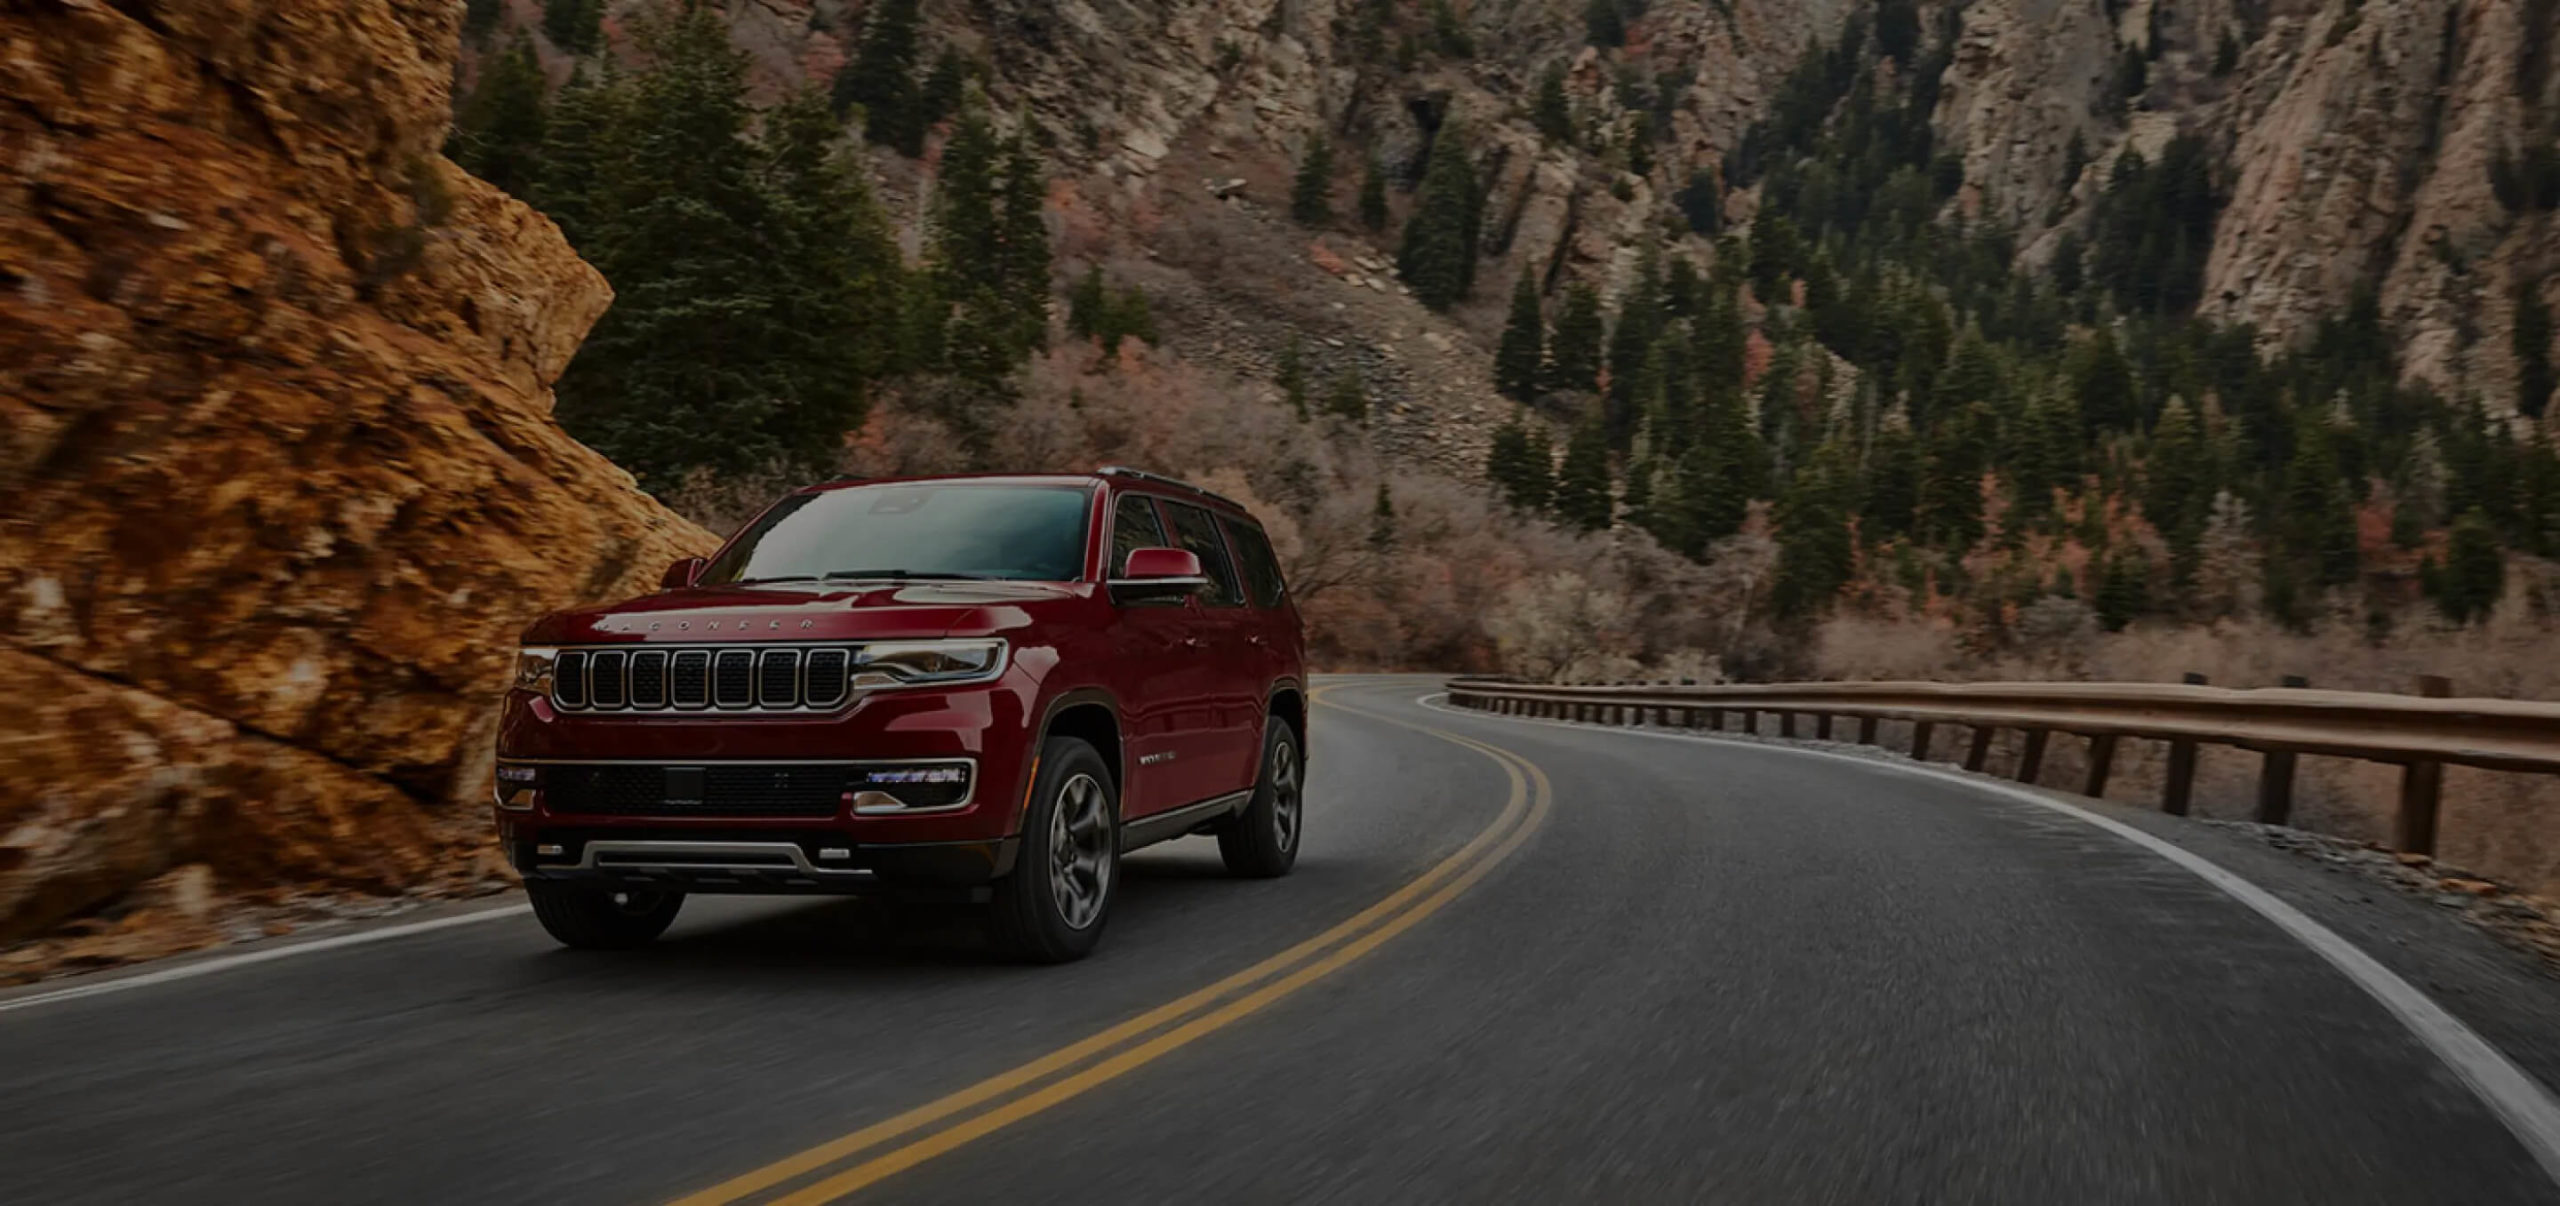 Welcome to Hill-Kelly Dodge Chrysler Jeep